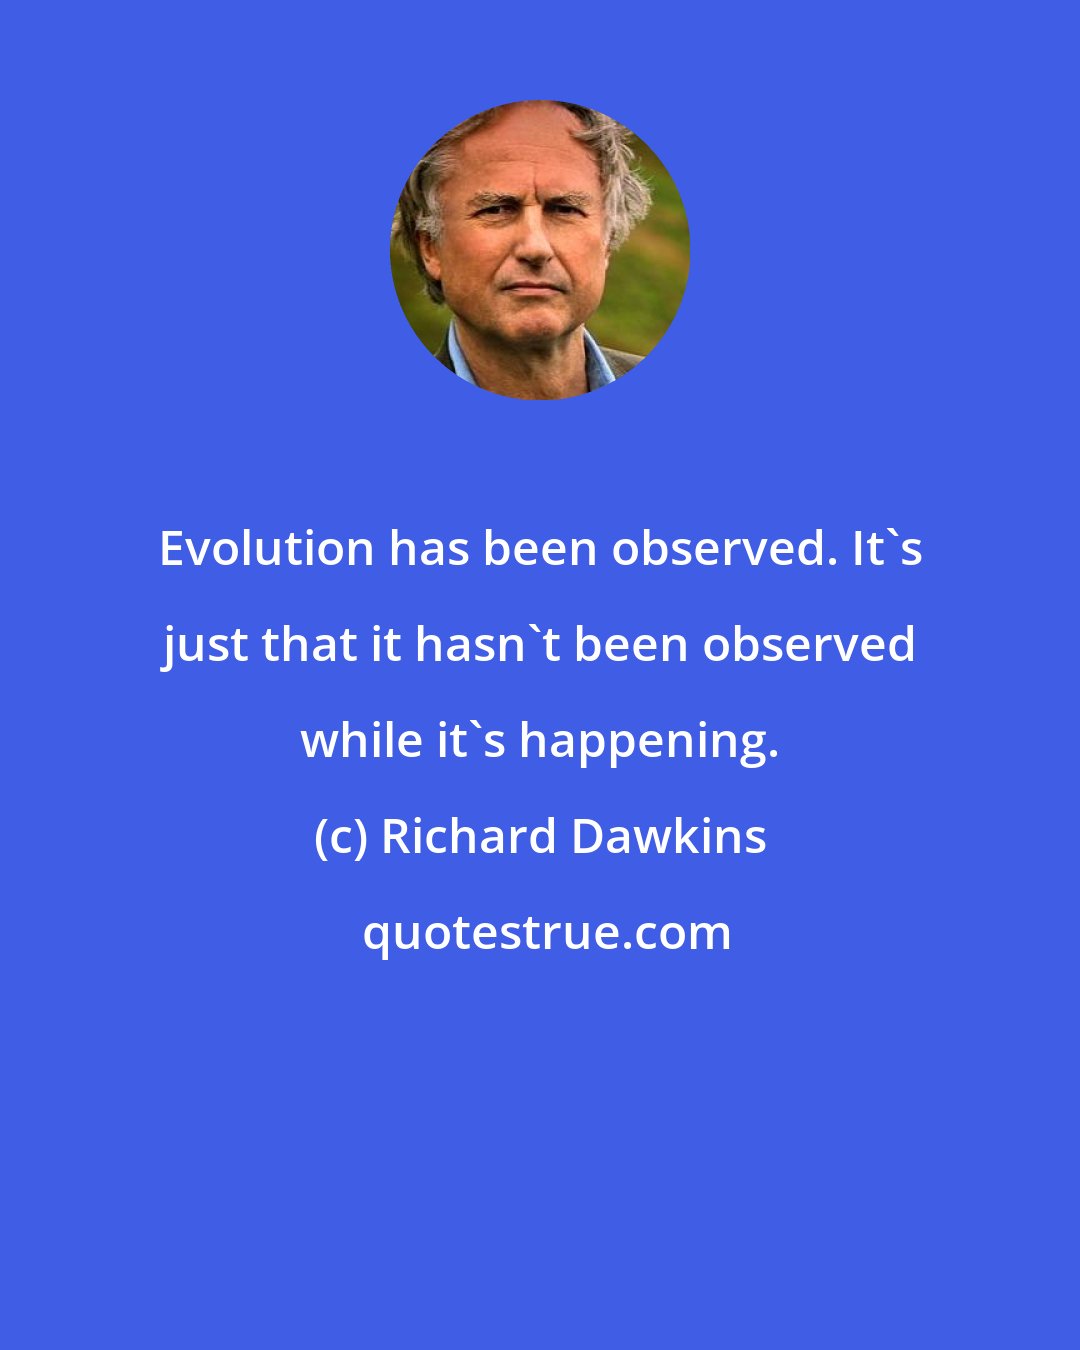 Richard Dawkins: Evolution has been observed. It's just that it hasn't been observed while it's happening.